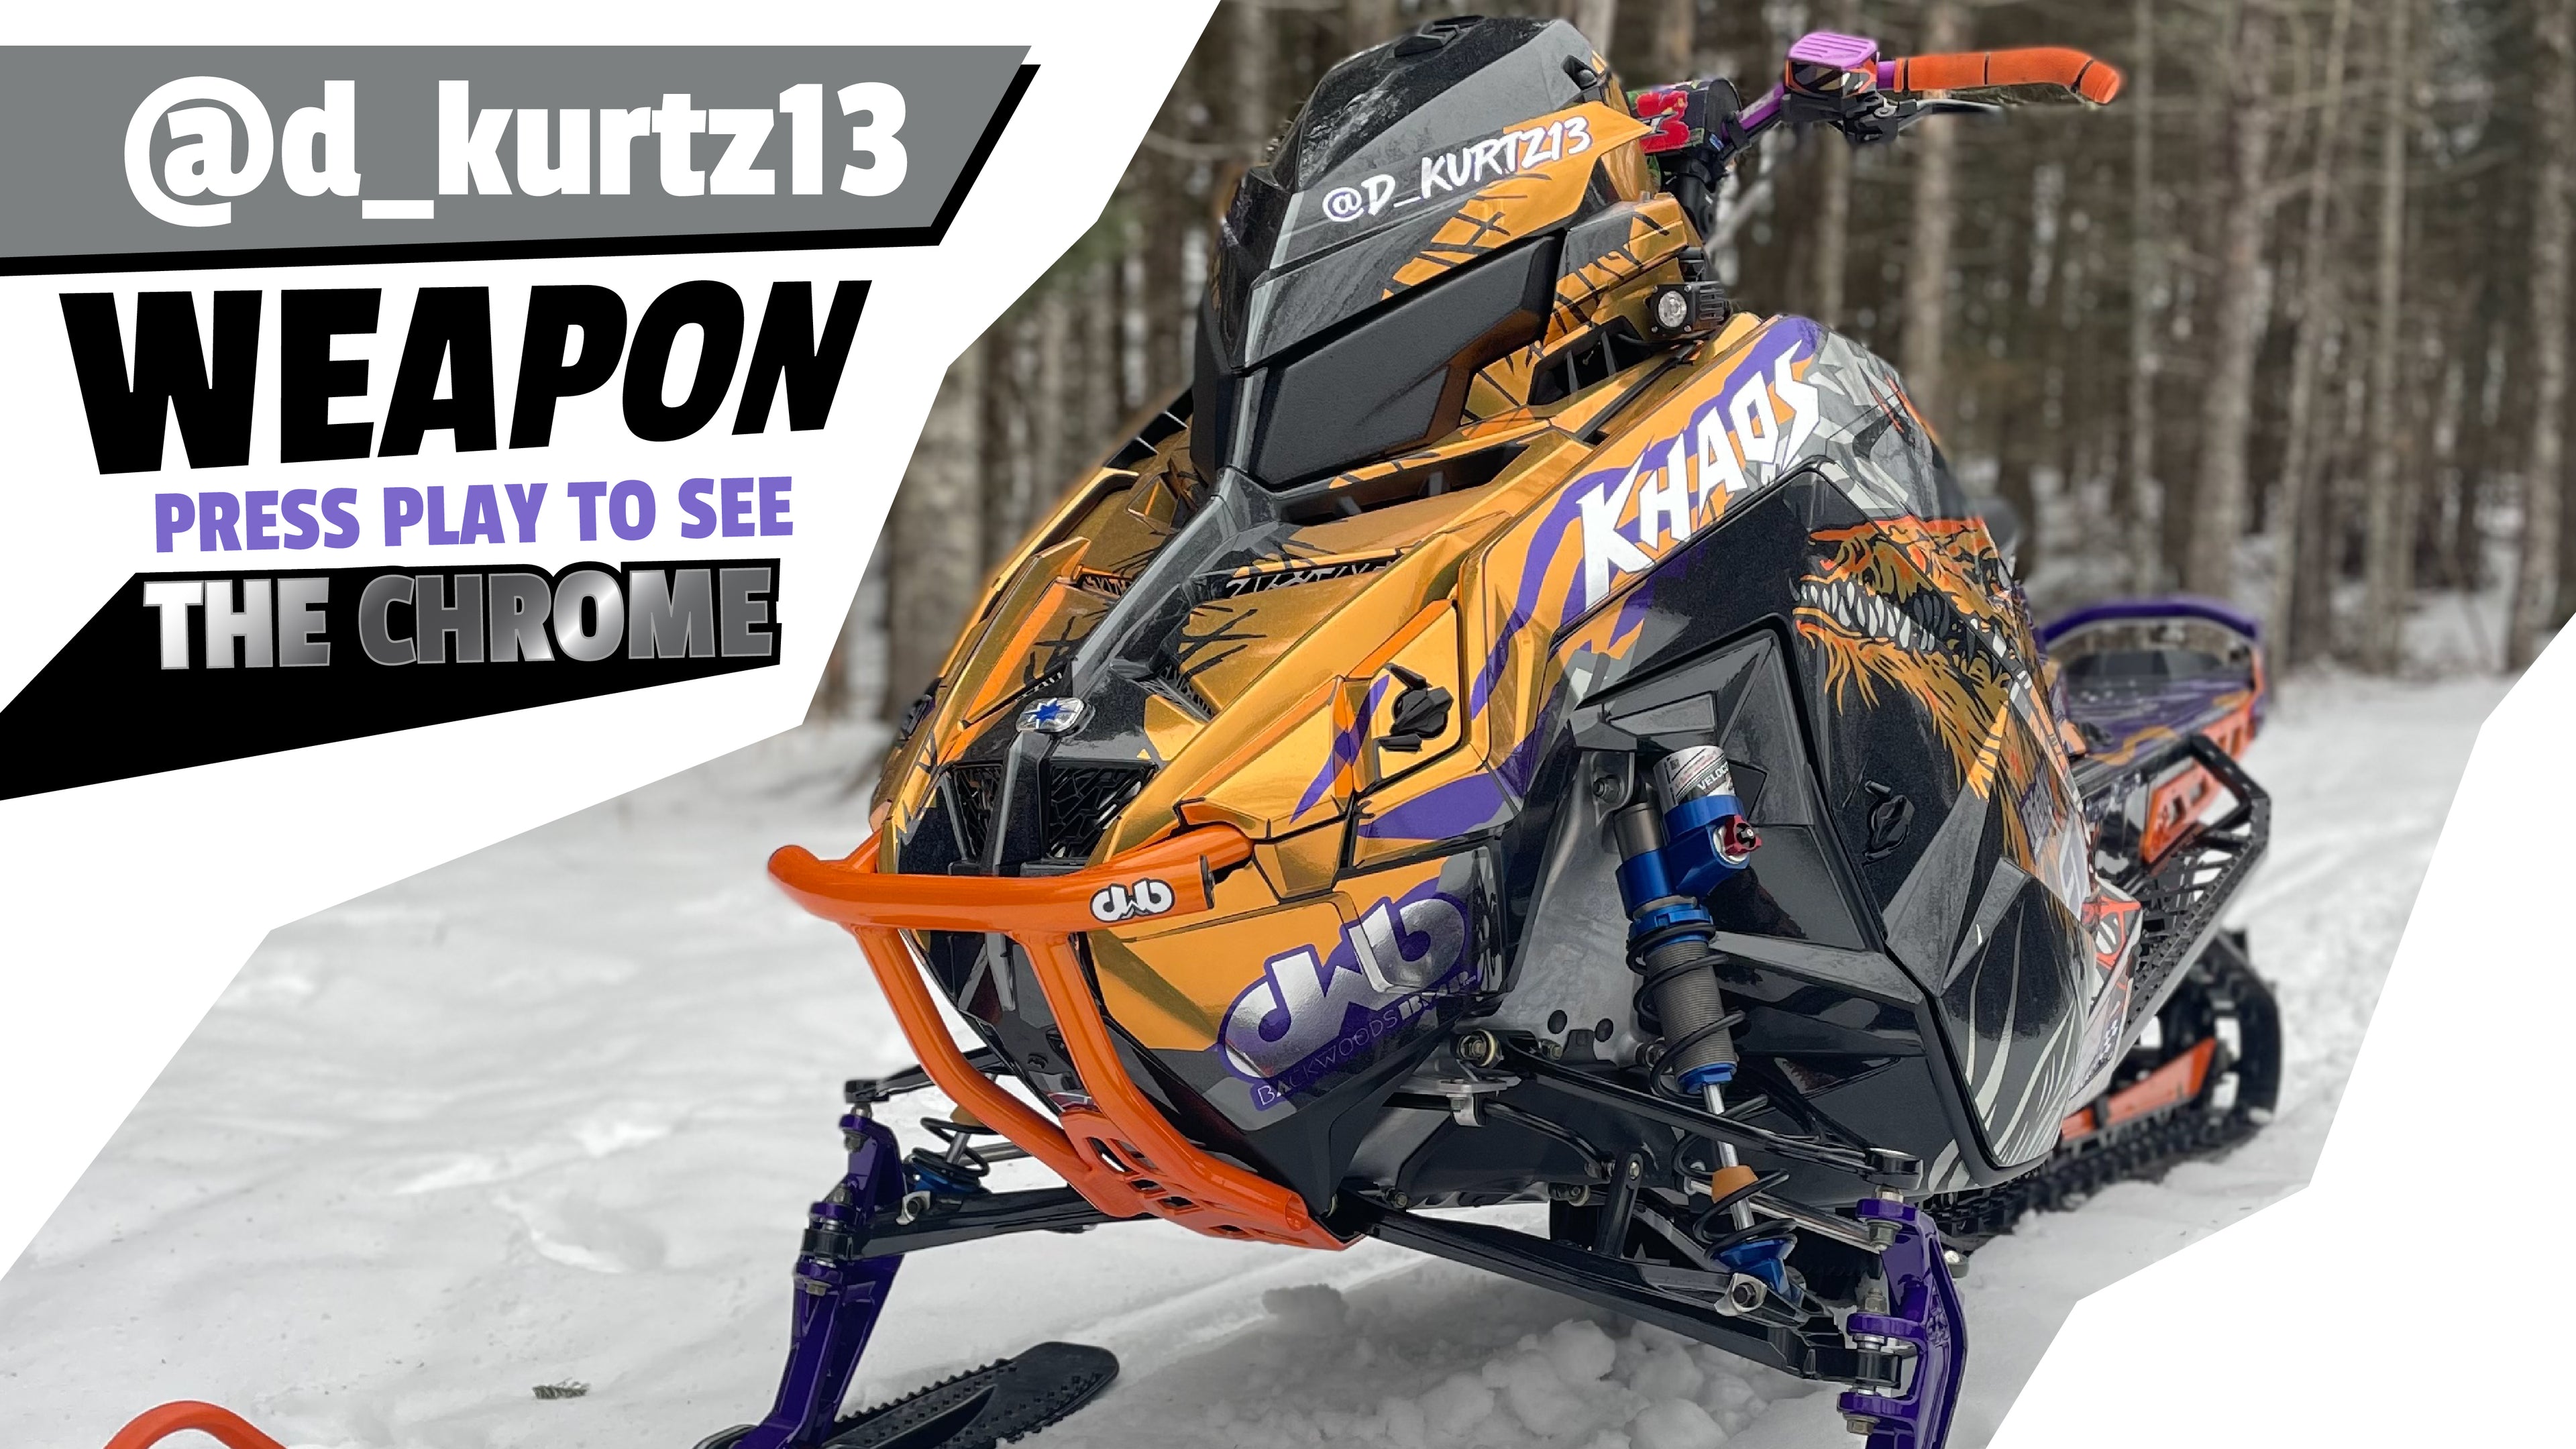 Load video: Chrome wrap finish on a polaris khaos with a sled wrap from ArcticFX Graphics illustrated by Leif Alvarsson